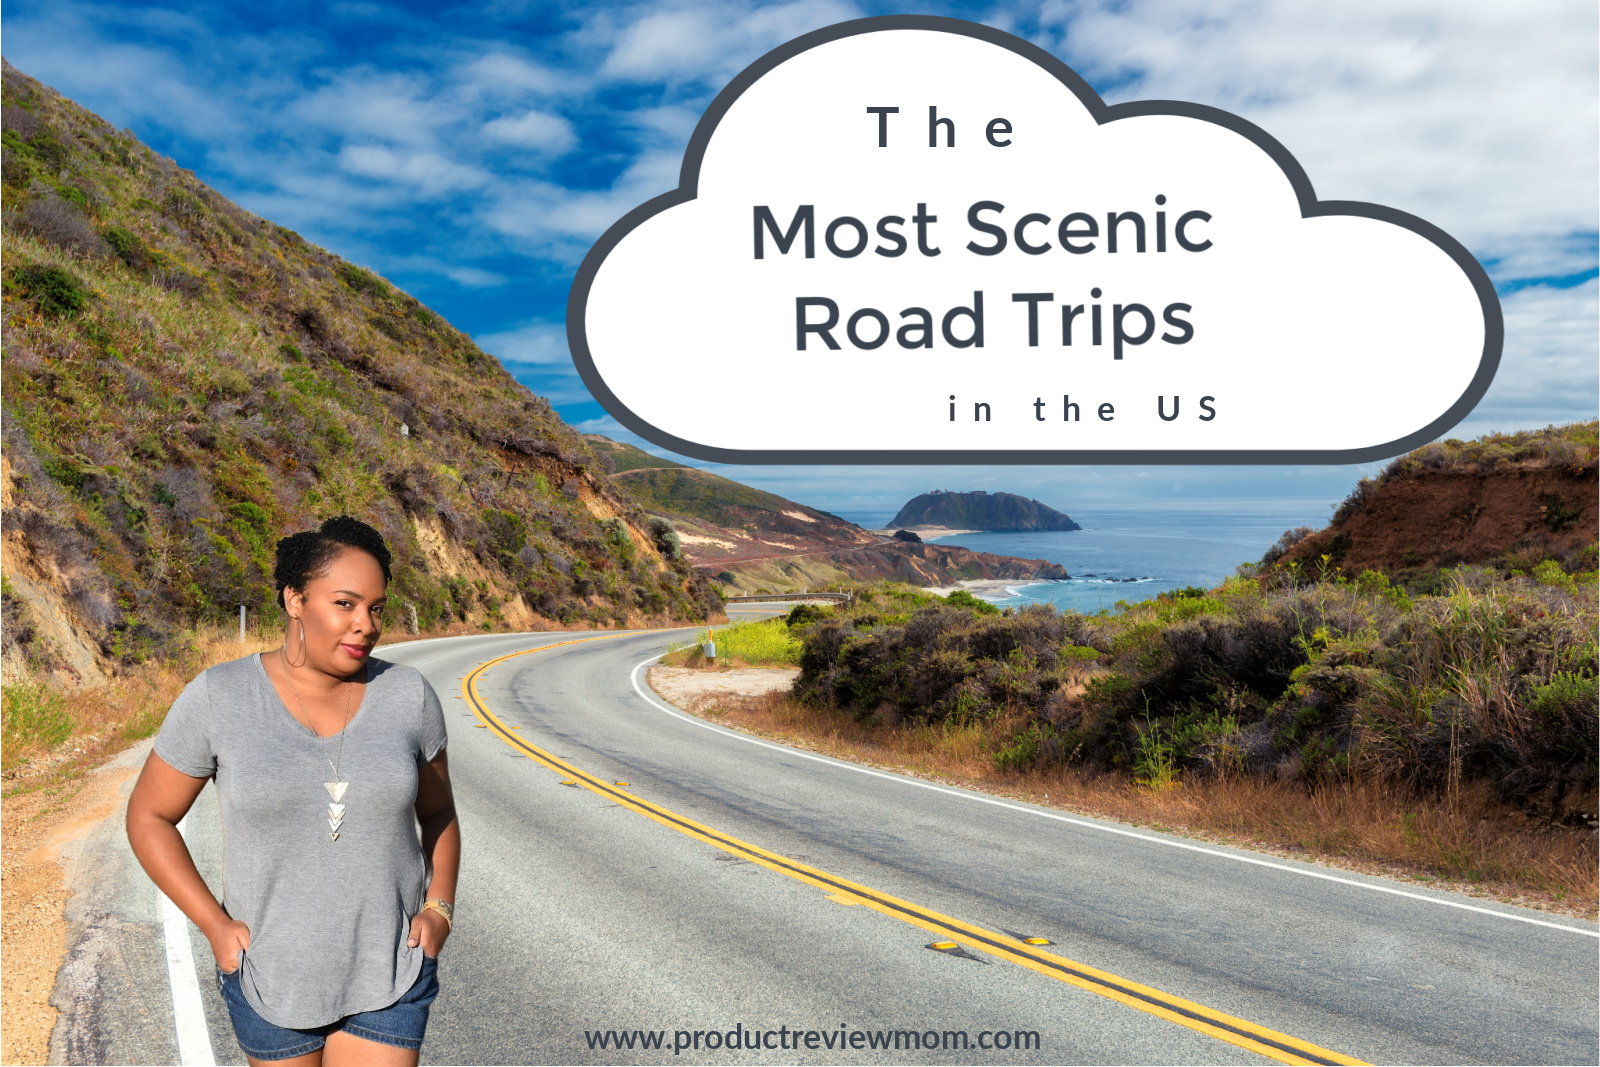 The Most Scenic Road Trips in the US